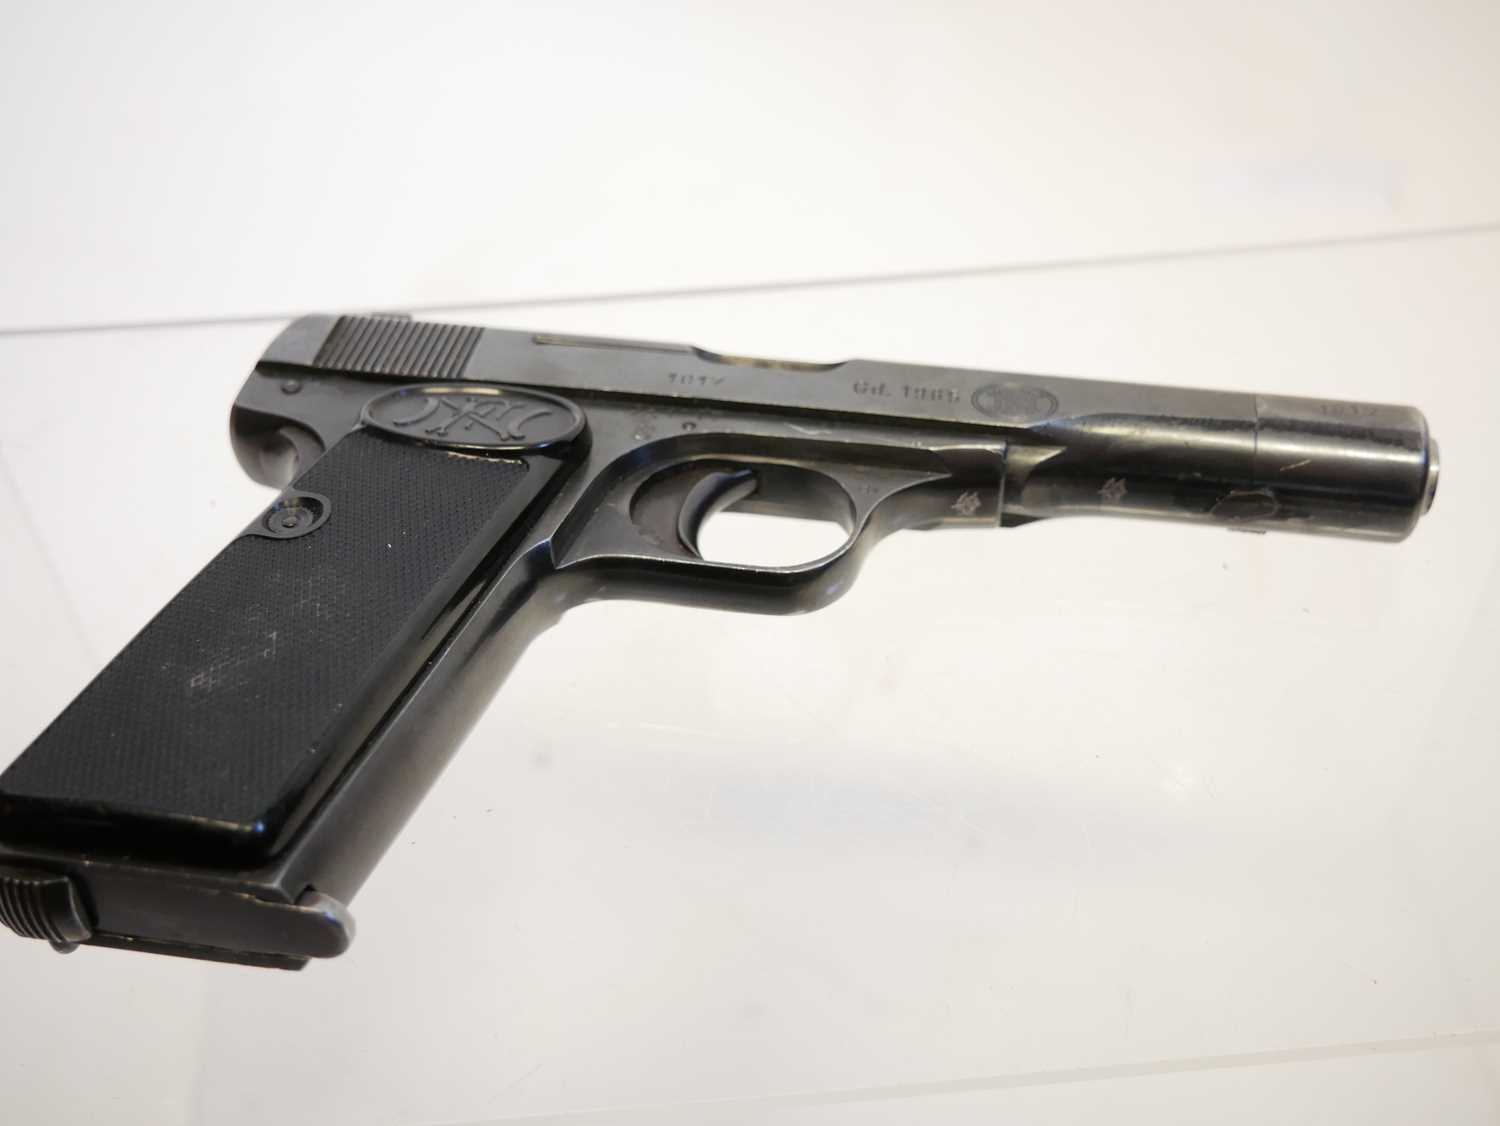 Deactivated FN Browning 1922 semi automatic pistol - Image 2 of 7